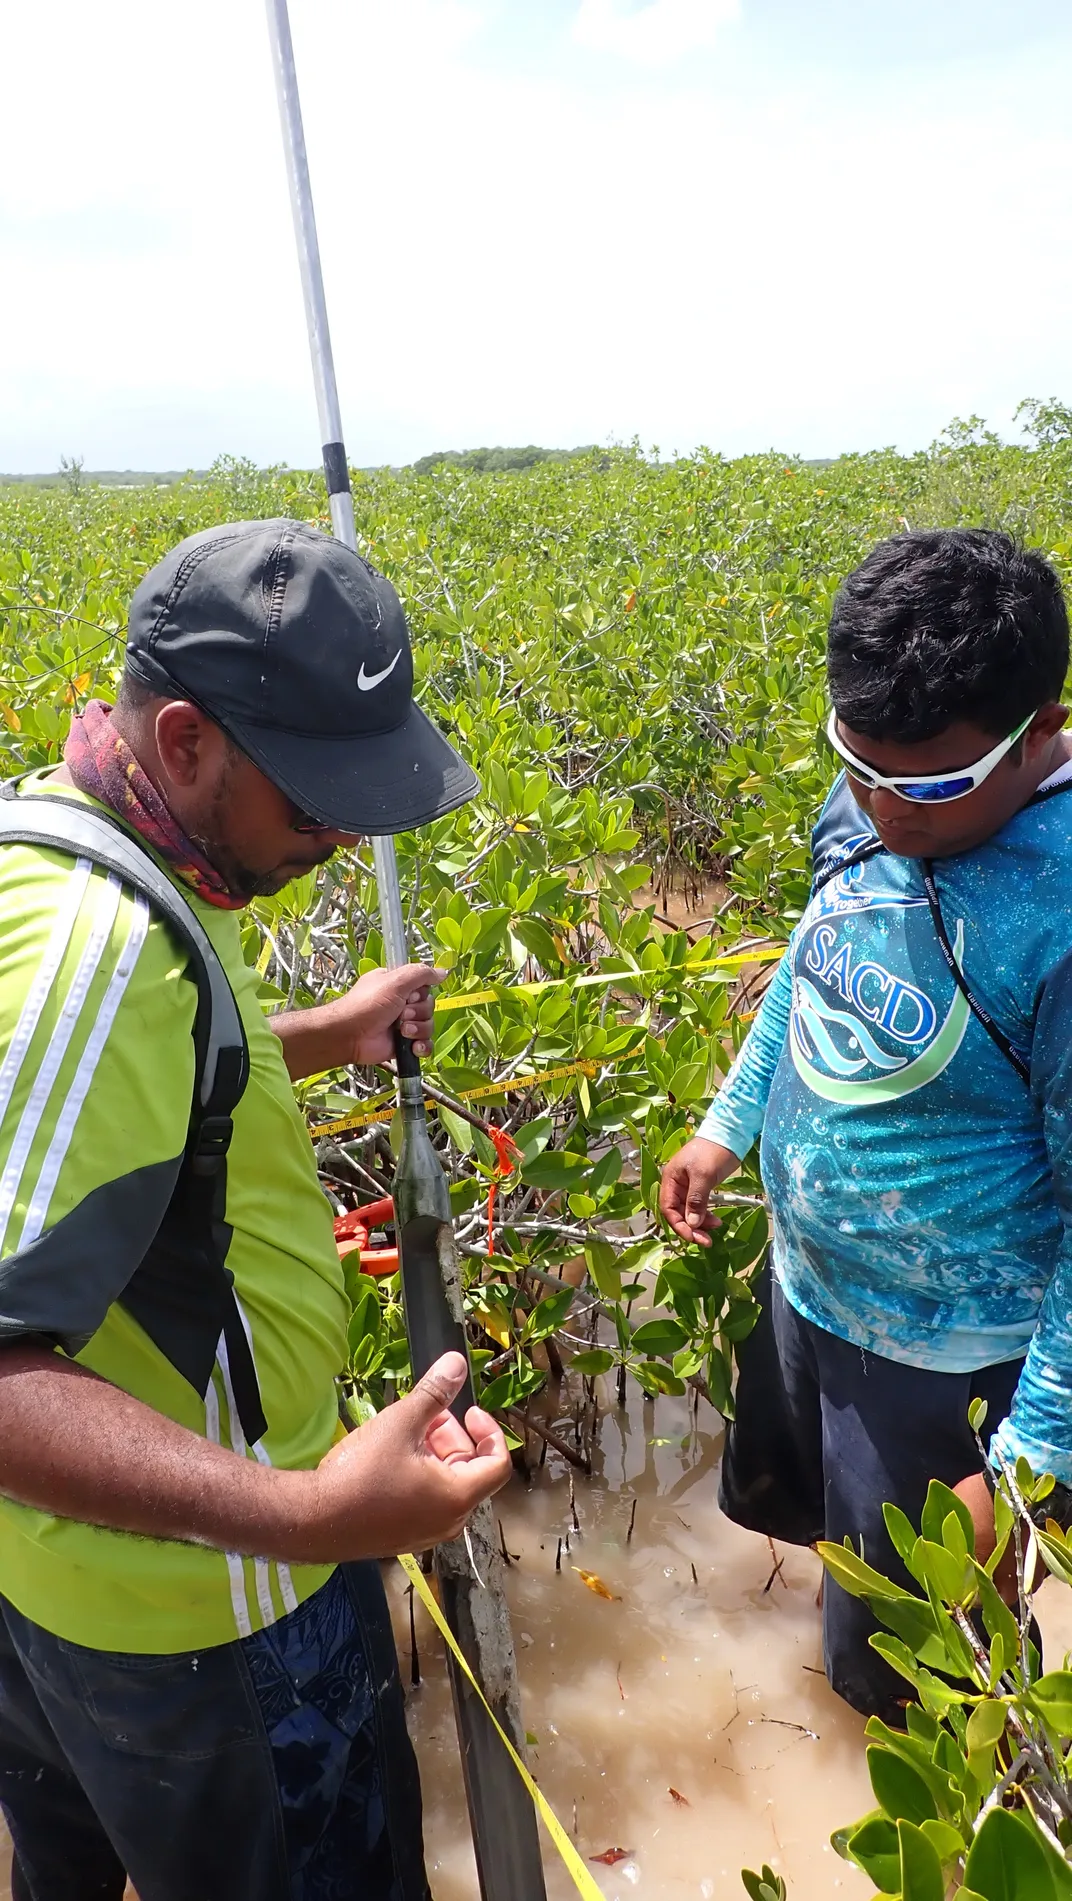 Two scientists in bright green and blue shirts stand in ankle-deep water, in a patch of small green mangrove plants. The one on the left holds a long metallic pole.